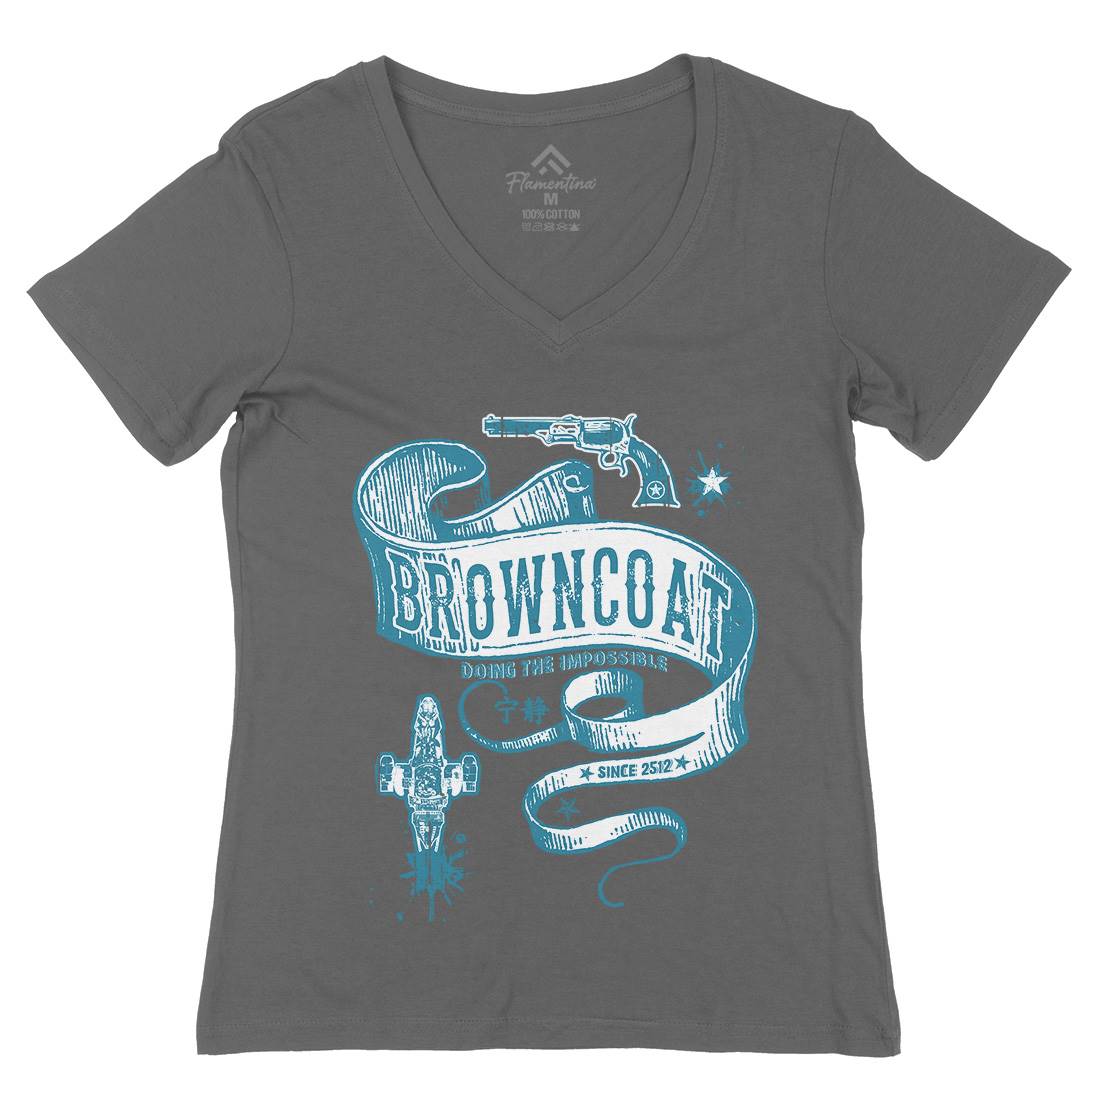 Browncoat Womens Organic V-Neck T-Shirt Space D283